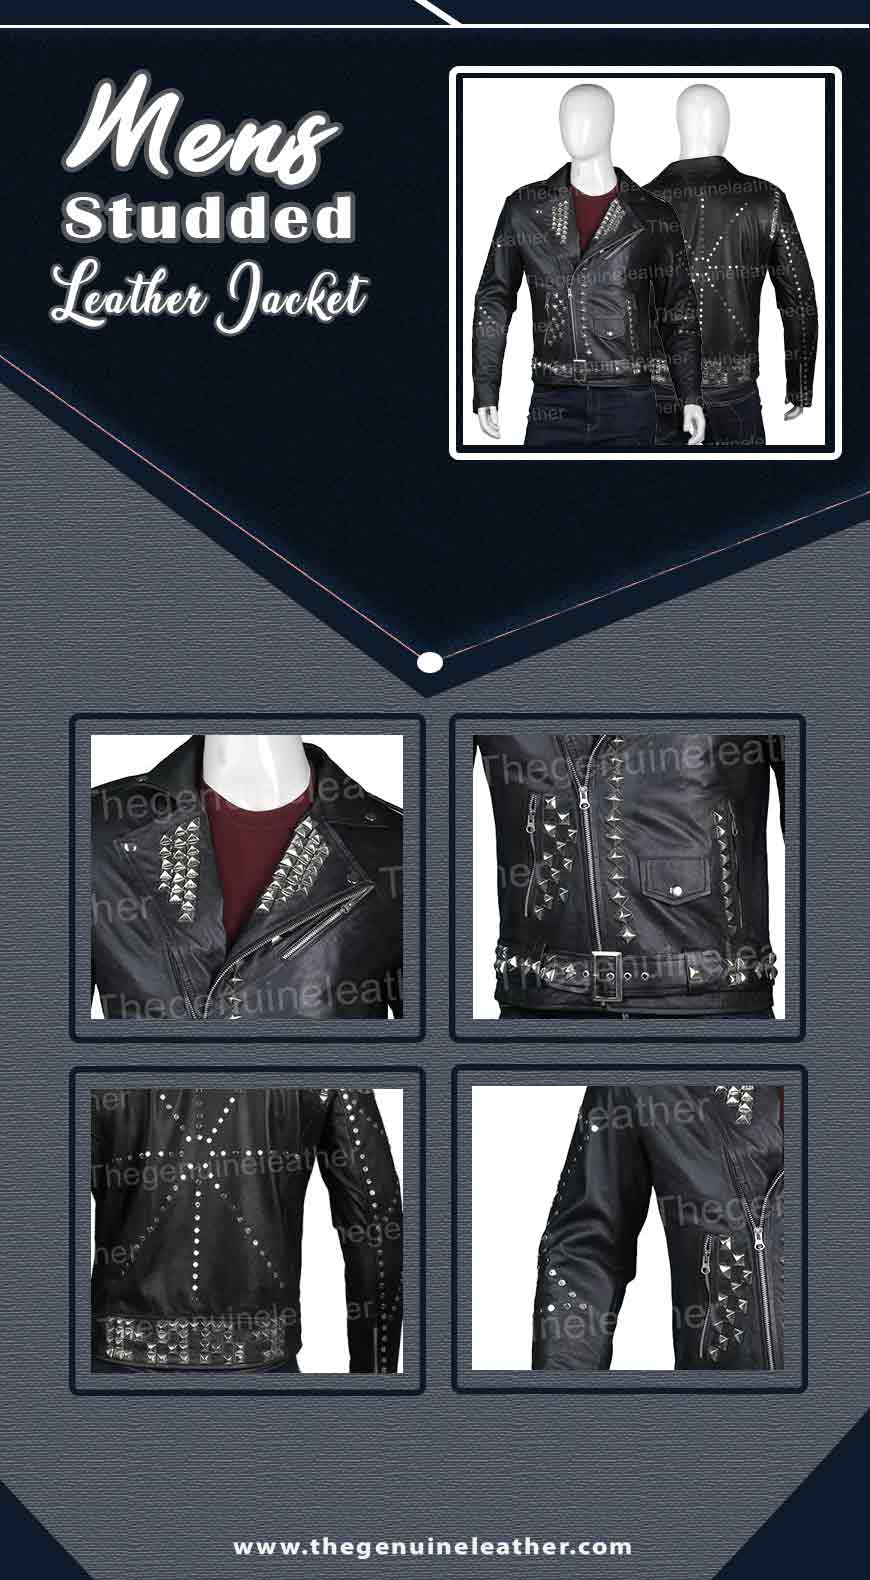 Mens Studded Leather Jacket Infographic